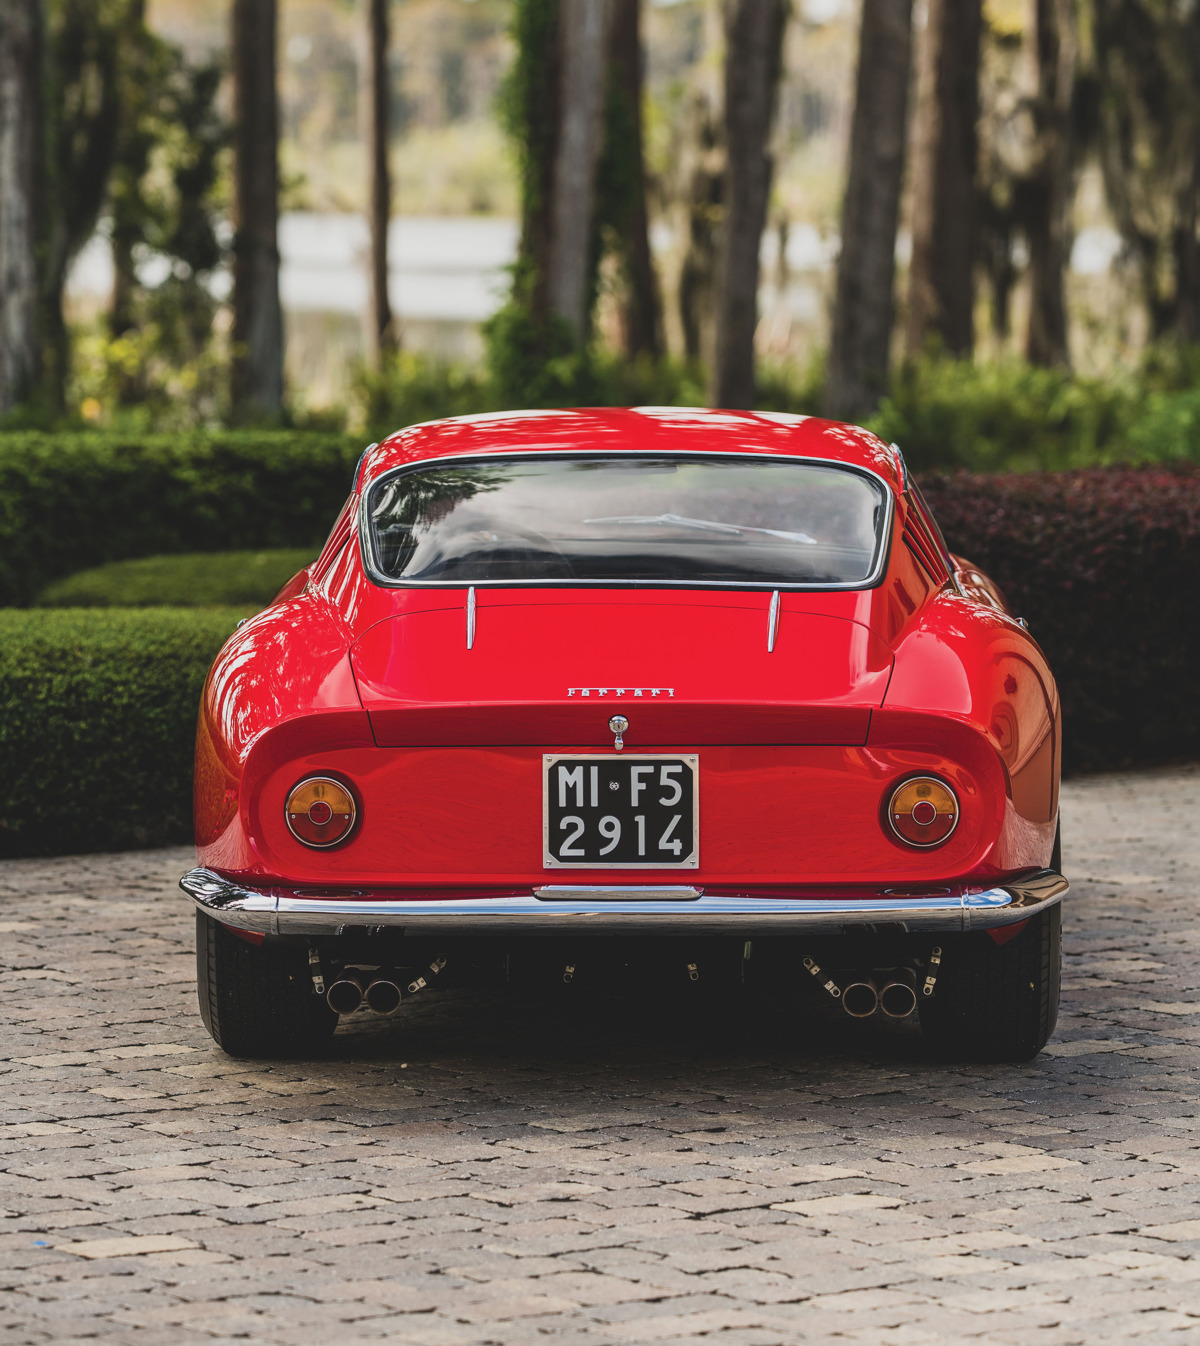 Rear of 1966 Ferrari 275 GTB/C by Scaglietti offered at RM Sotheby's Monterey live auction 2022